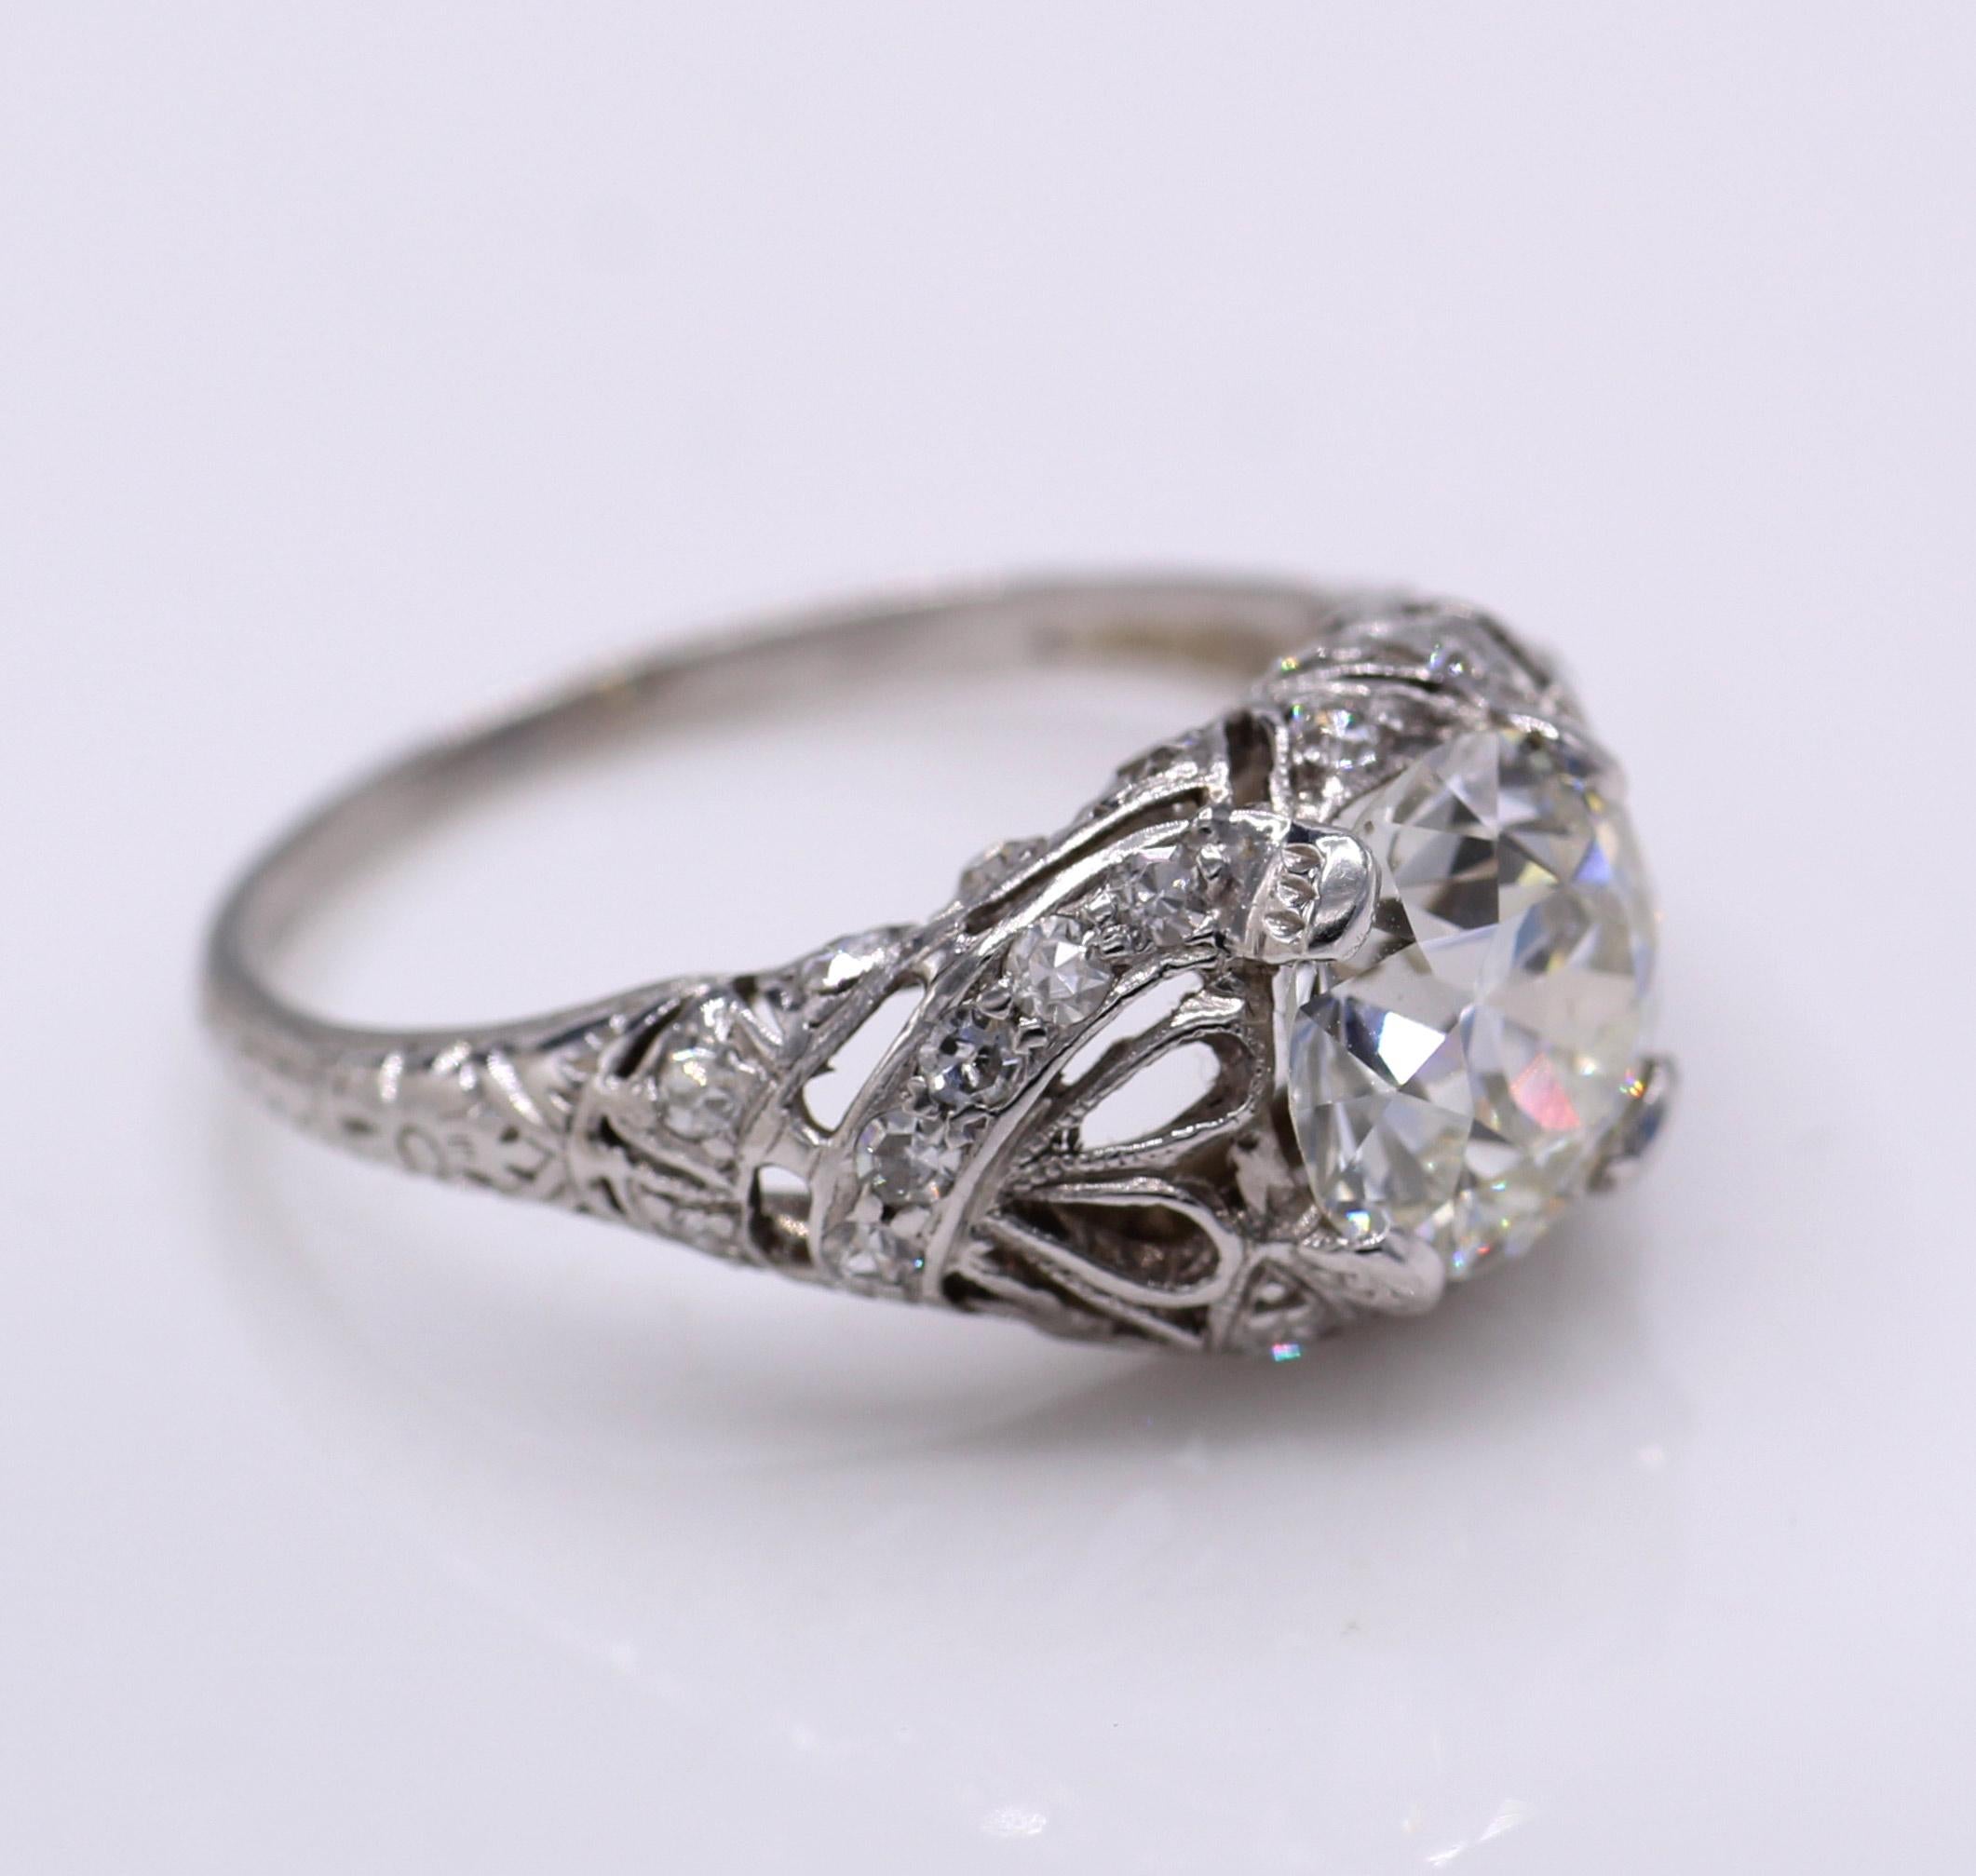 Beautifully designed and masterfully handcrafted this Art Deco platinum engagement ring features an Old European Cut diamond weighing 2.03 carats. The unique wider faceting, exclusive to this period bring about an amazing fire and life in this